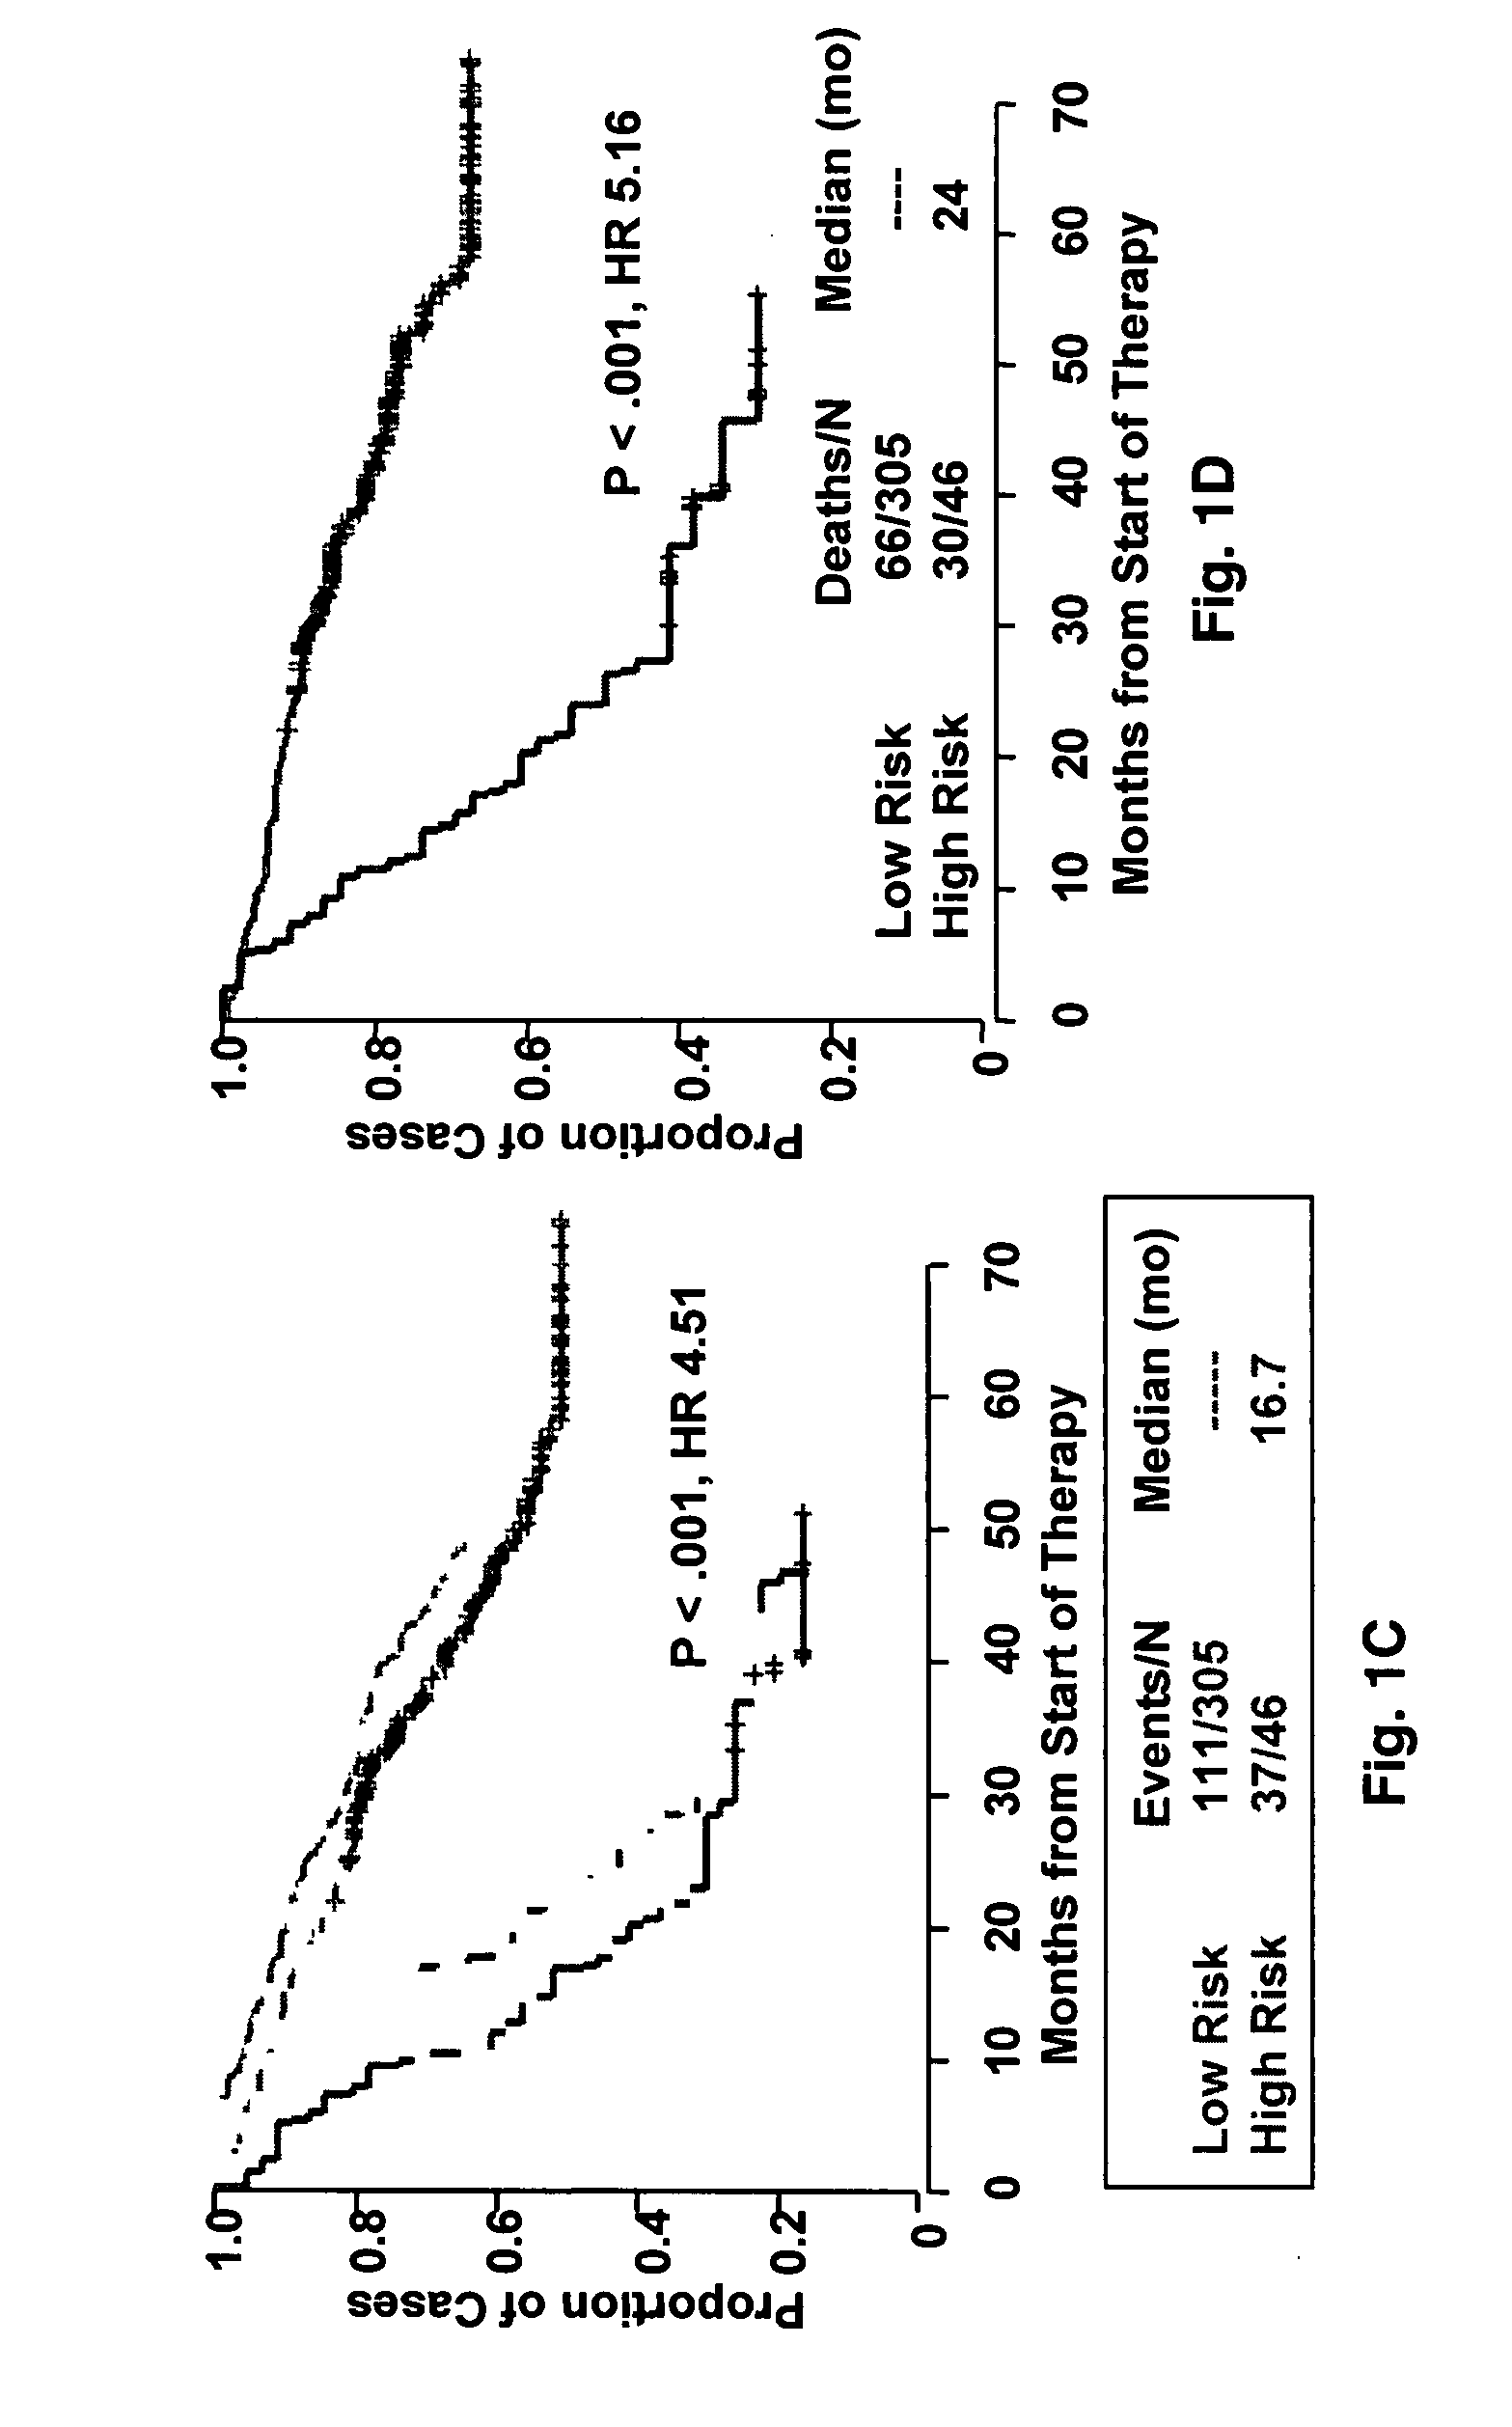 Gene expression profiling based identification of genomic signature of high-risk multiple myeloma and uses thereof